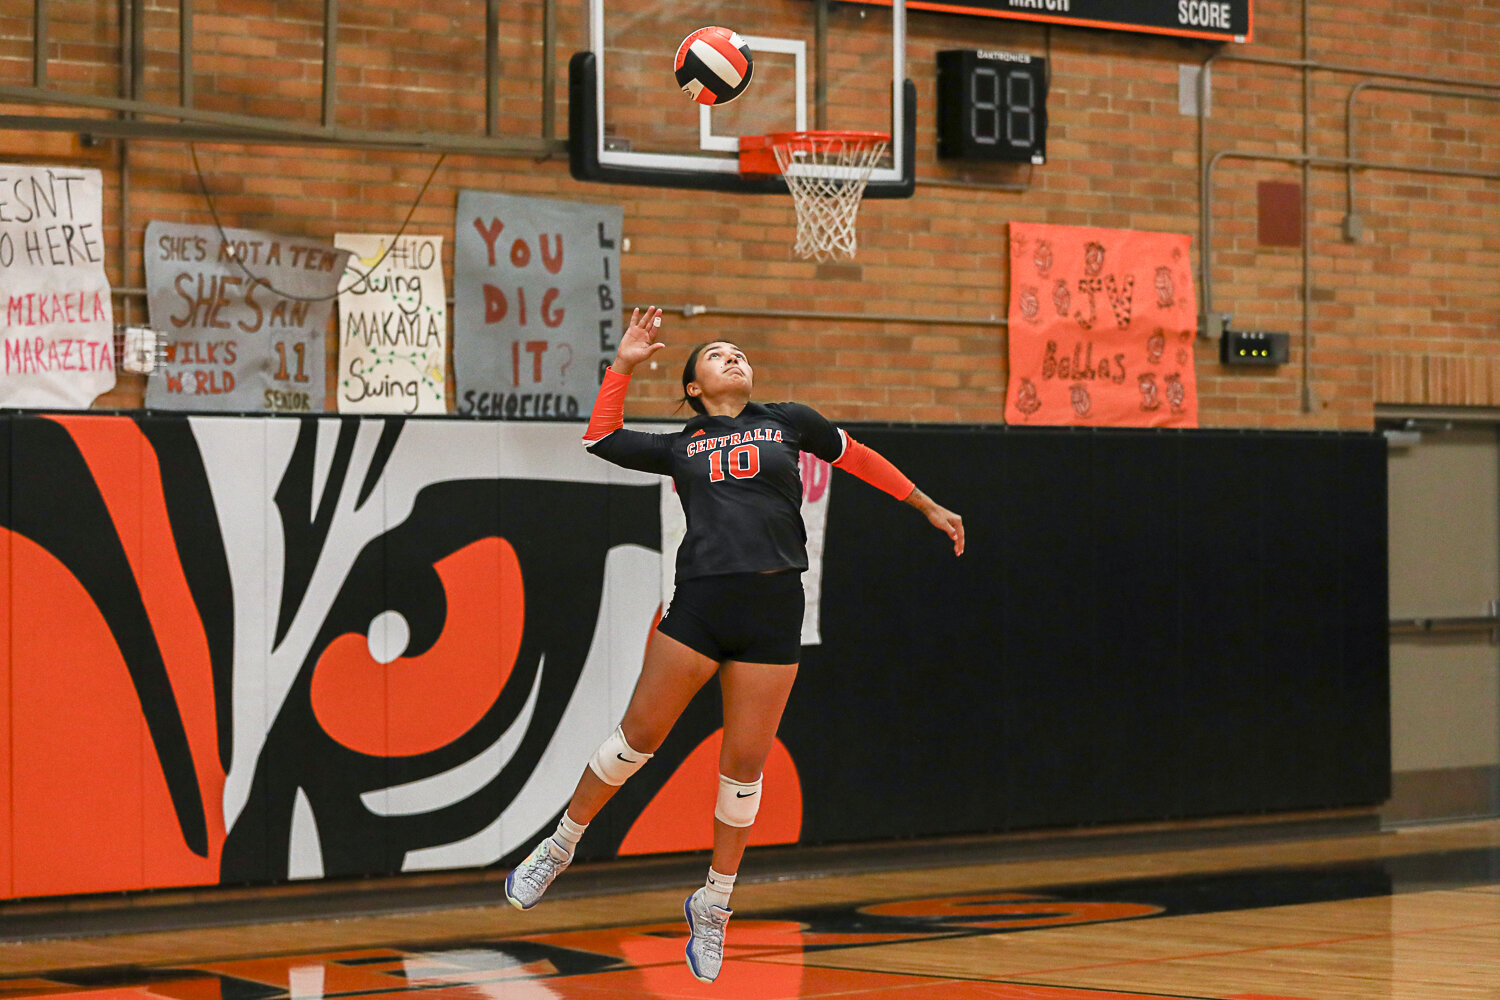 Makayla Chavez fires off a serve during the first set of Centralia's sweep of W.F. West on Sept. 21.